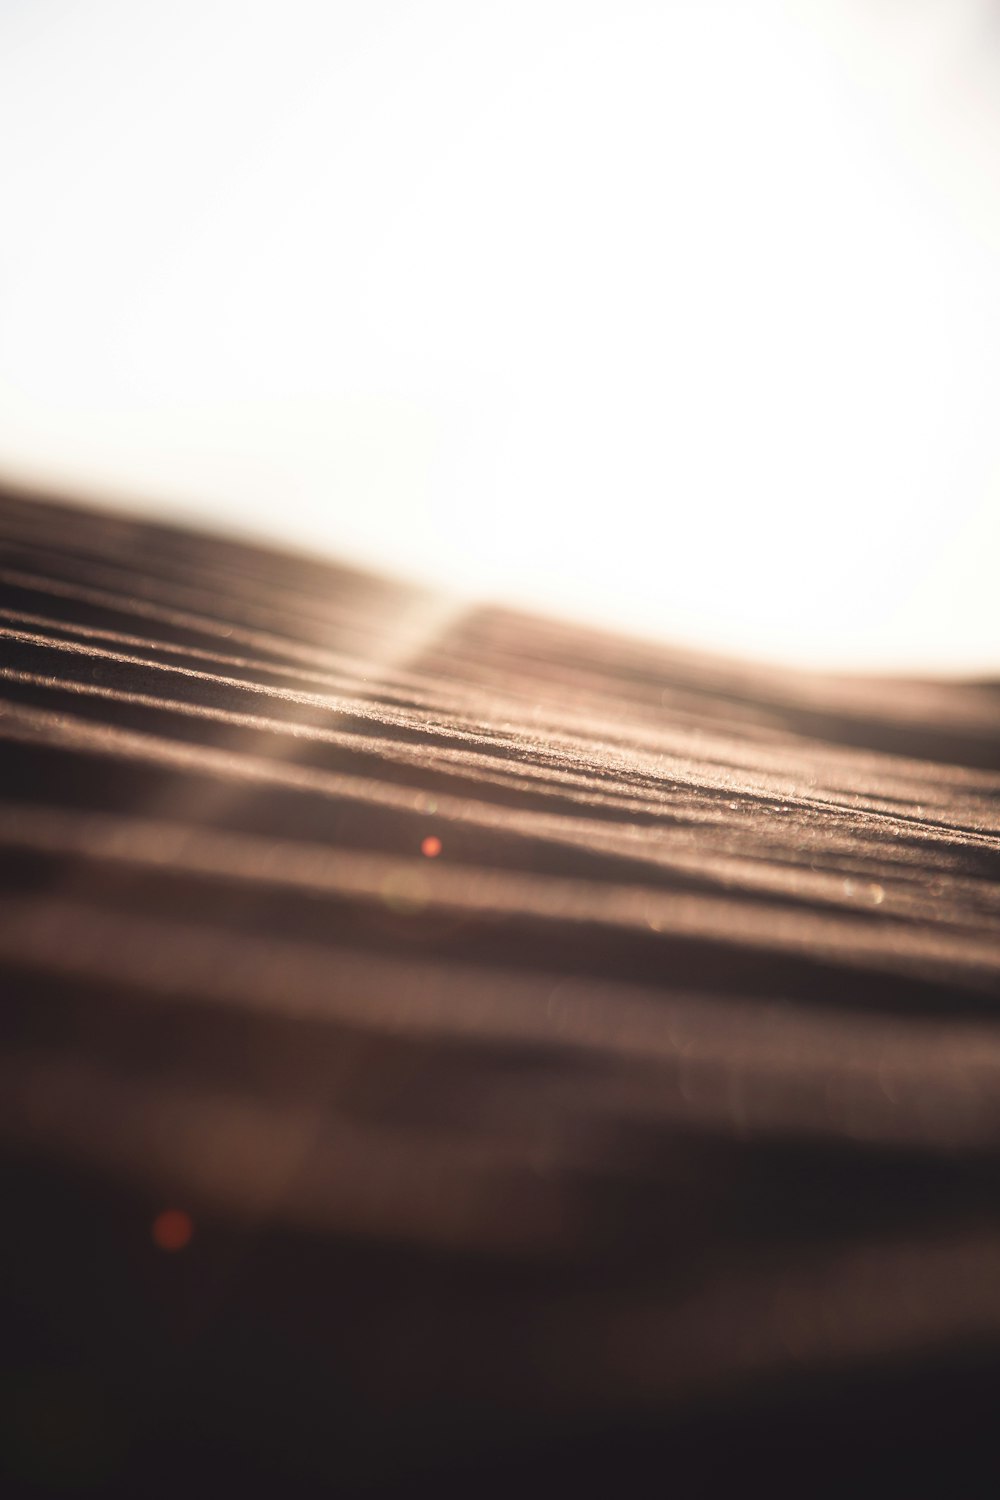 a blurry photo of a wooden surface